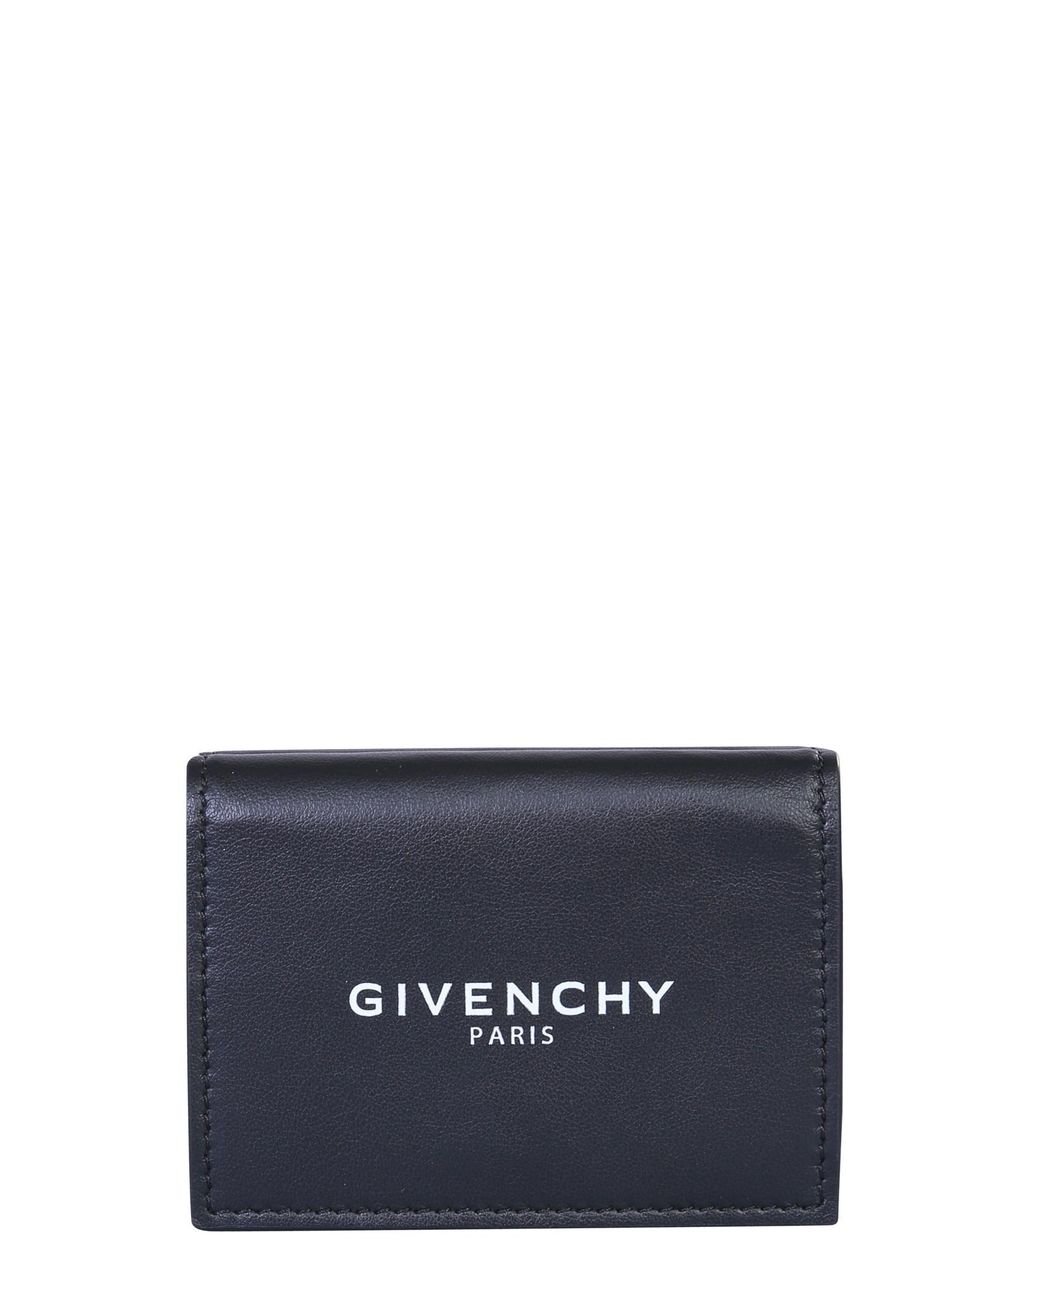 Givenchy Flower Leather Wallet With Logo in Black - Lyst